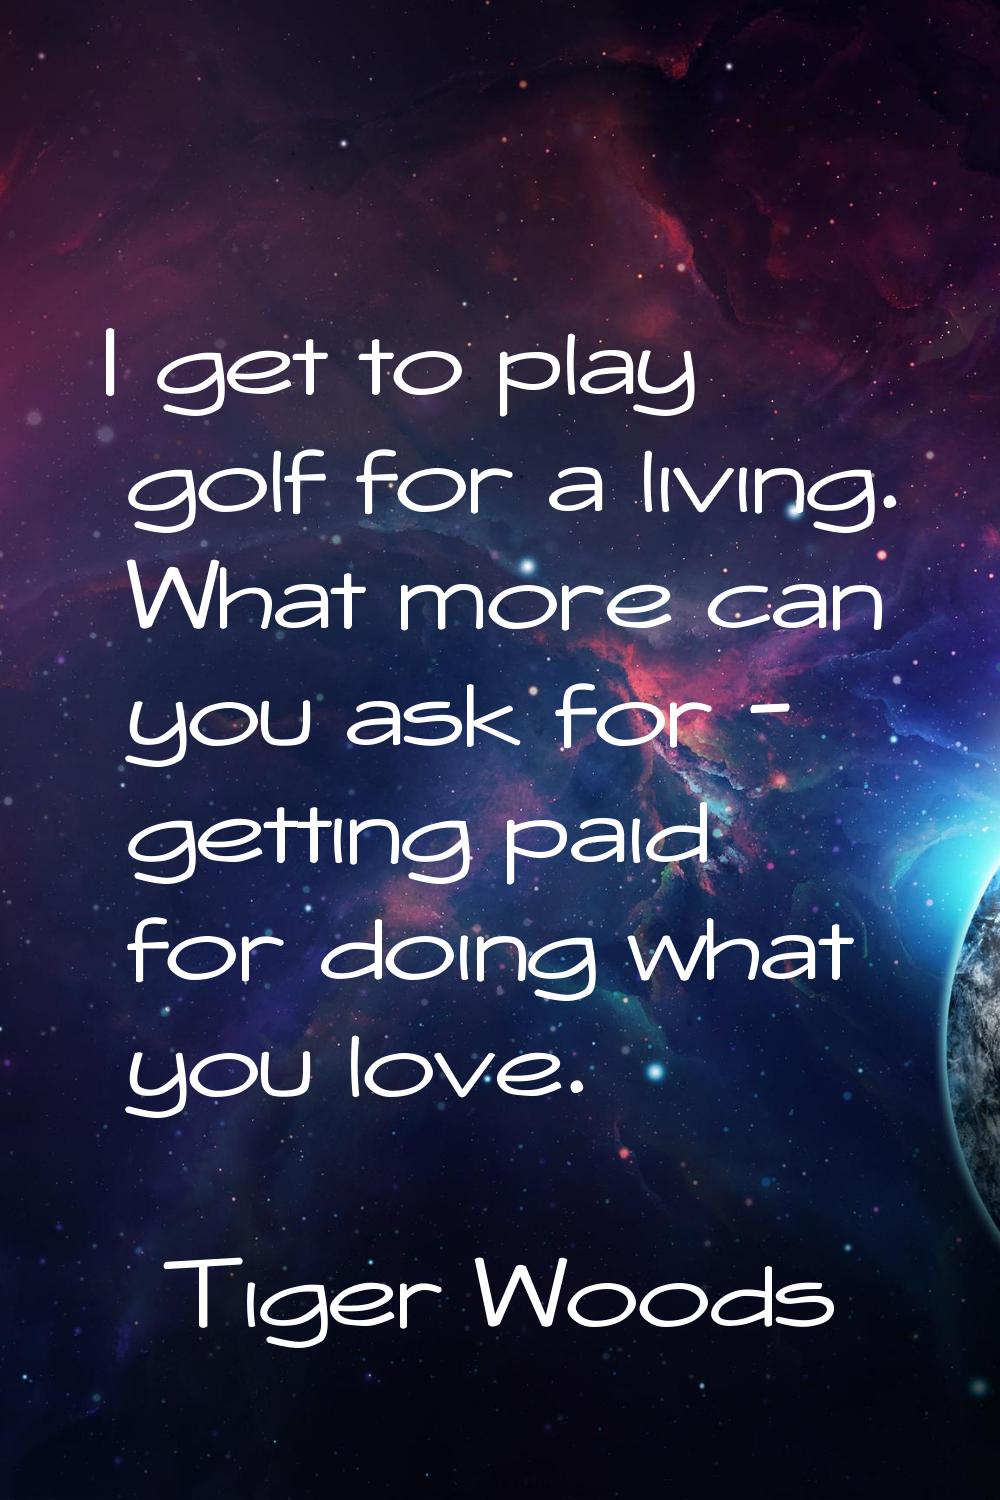 I get to play golf for a living. What more can you ask for - getting paid for doing what you love.